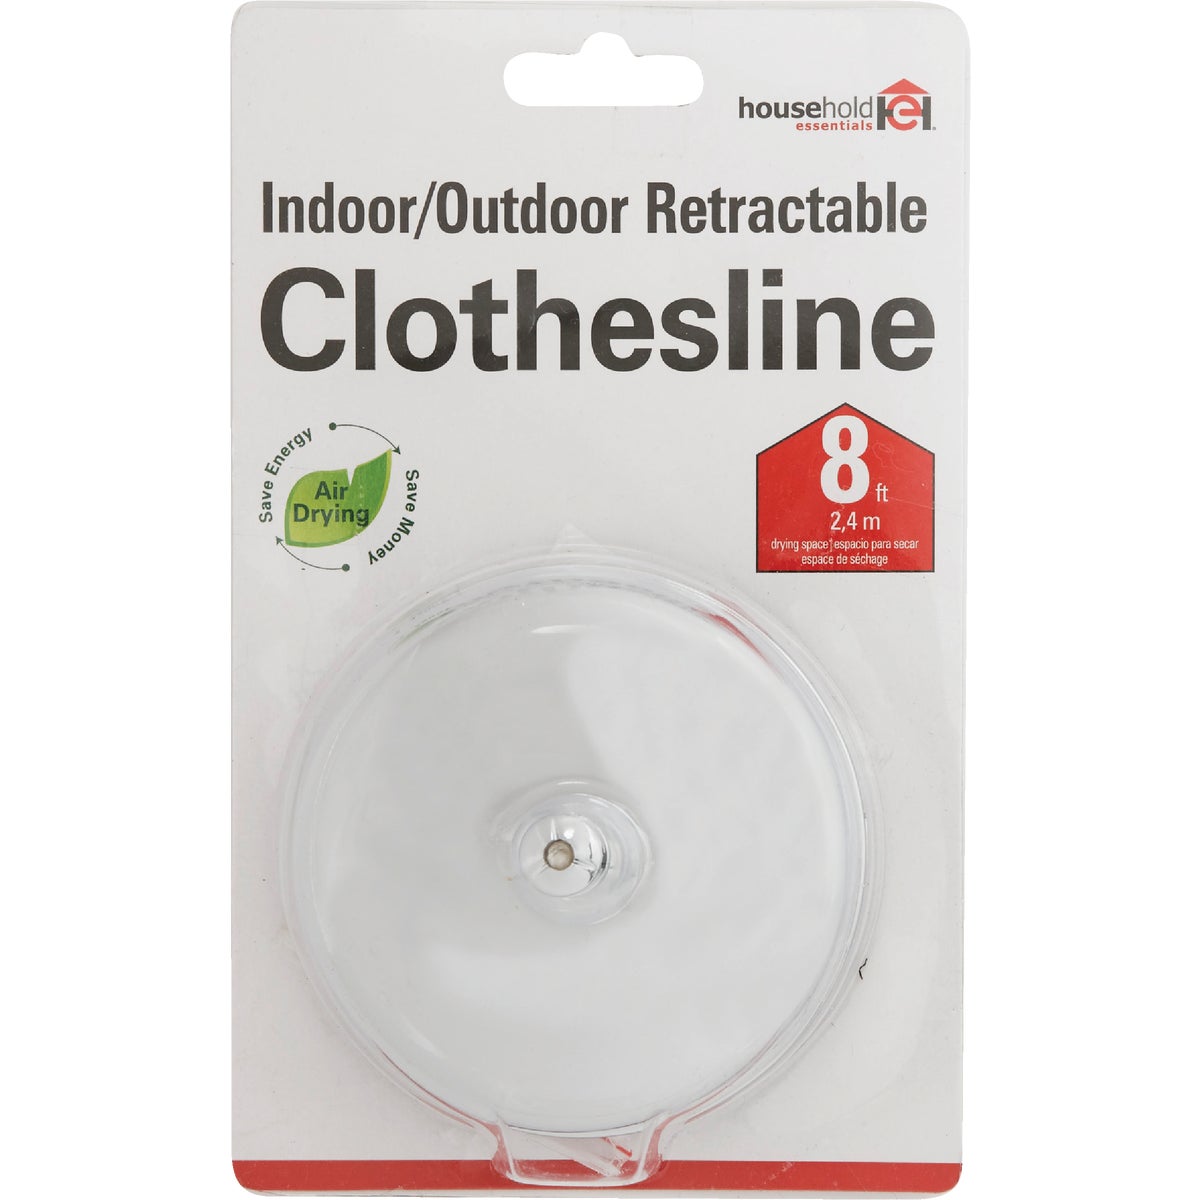 Household Essentials HHH-8 Household Essentials 8 Ft. 6.6 Lb. Capacity Stainless Steel Retractable Clothesline HHH-8